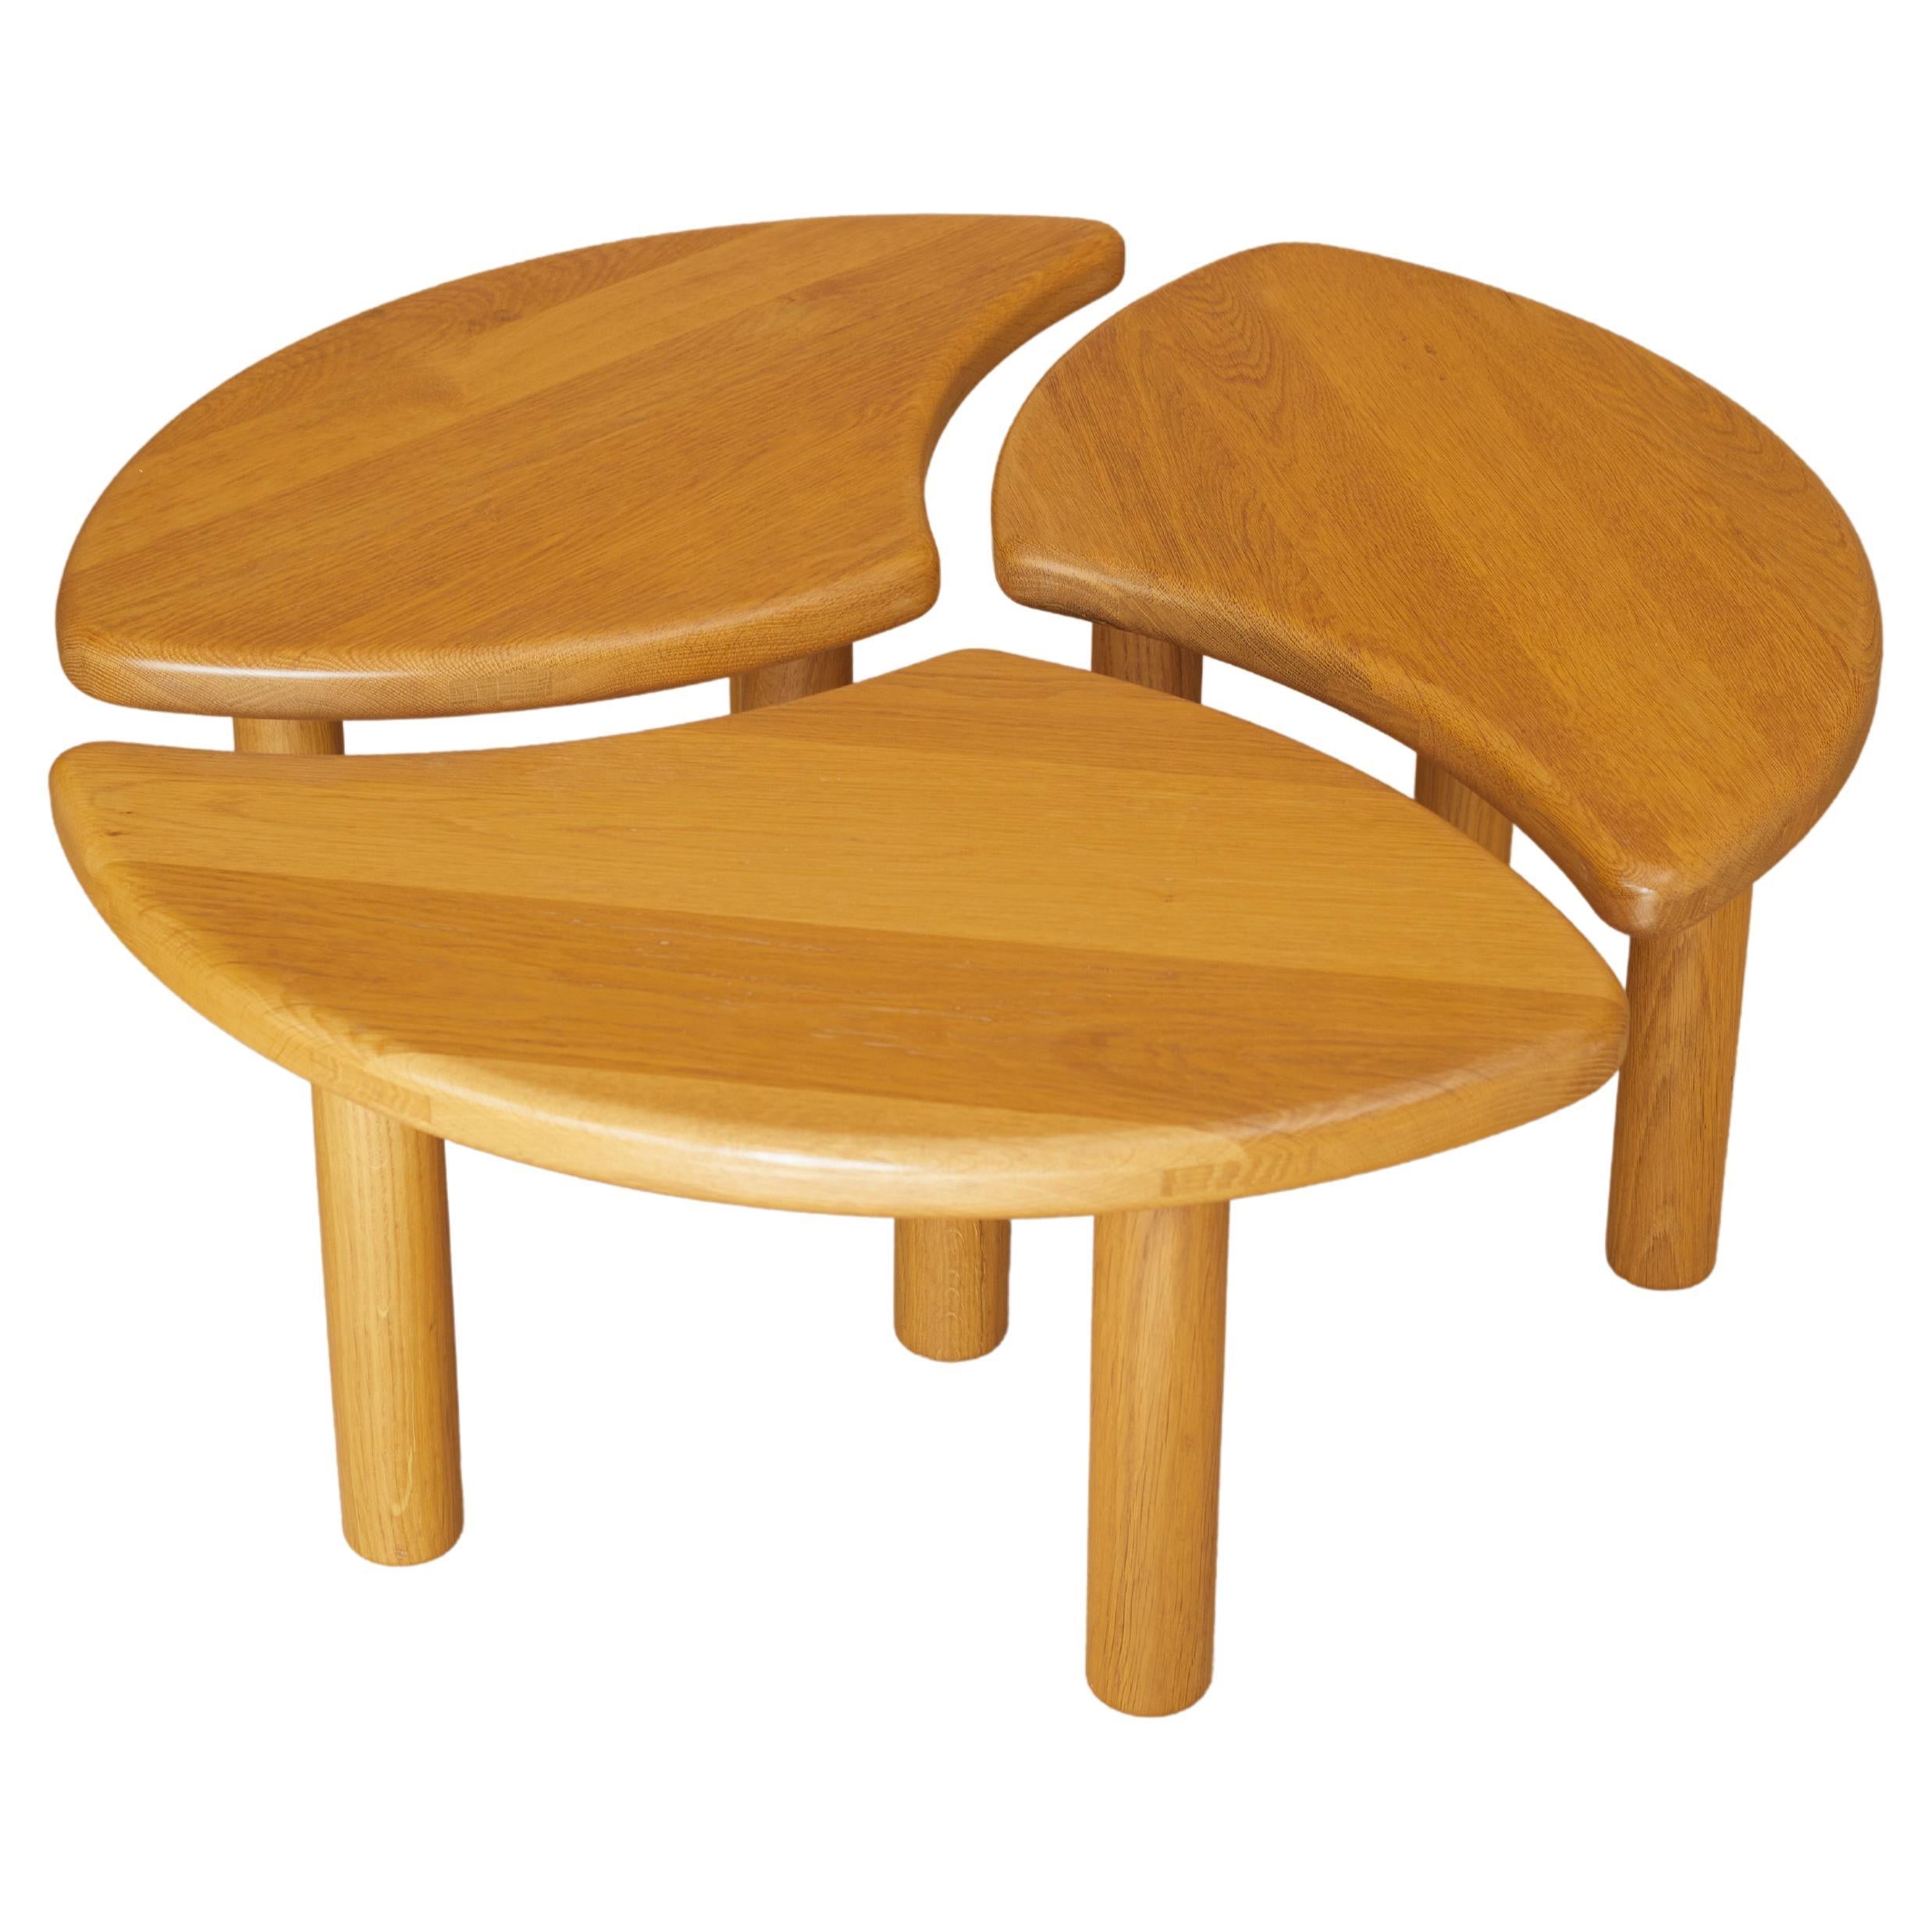 1980s French Limited, Made-to-order Solid Oak Modular Coffee Tables For Sale